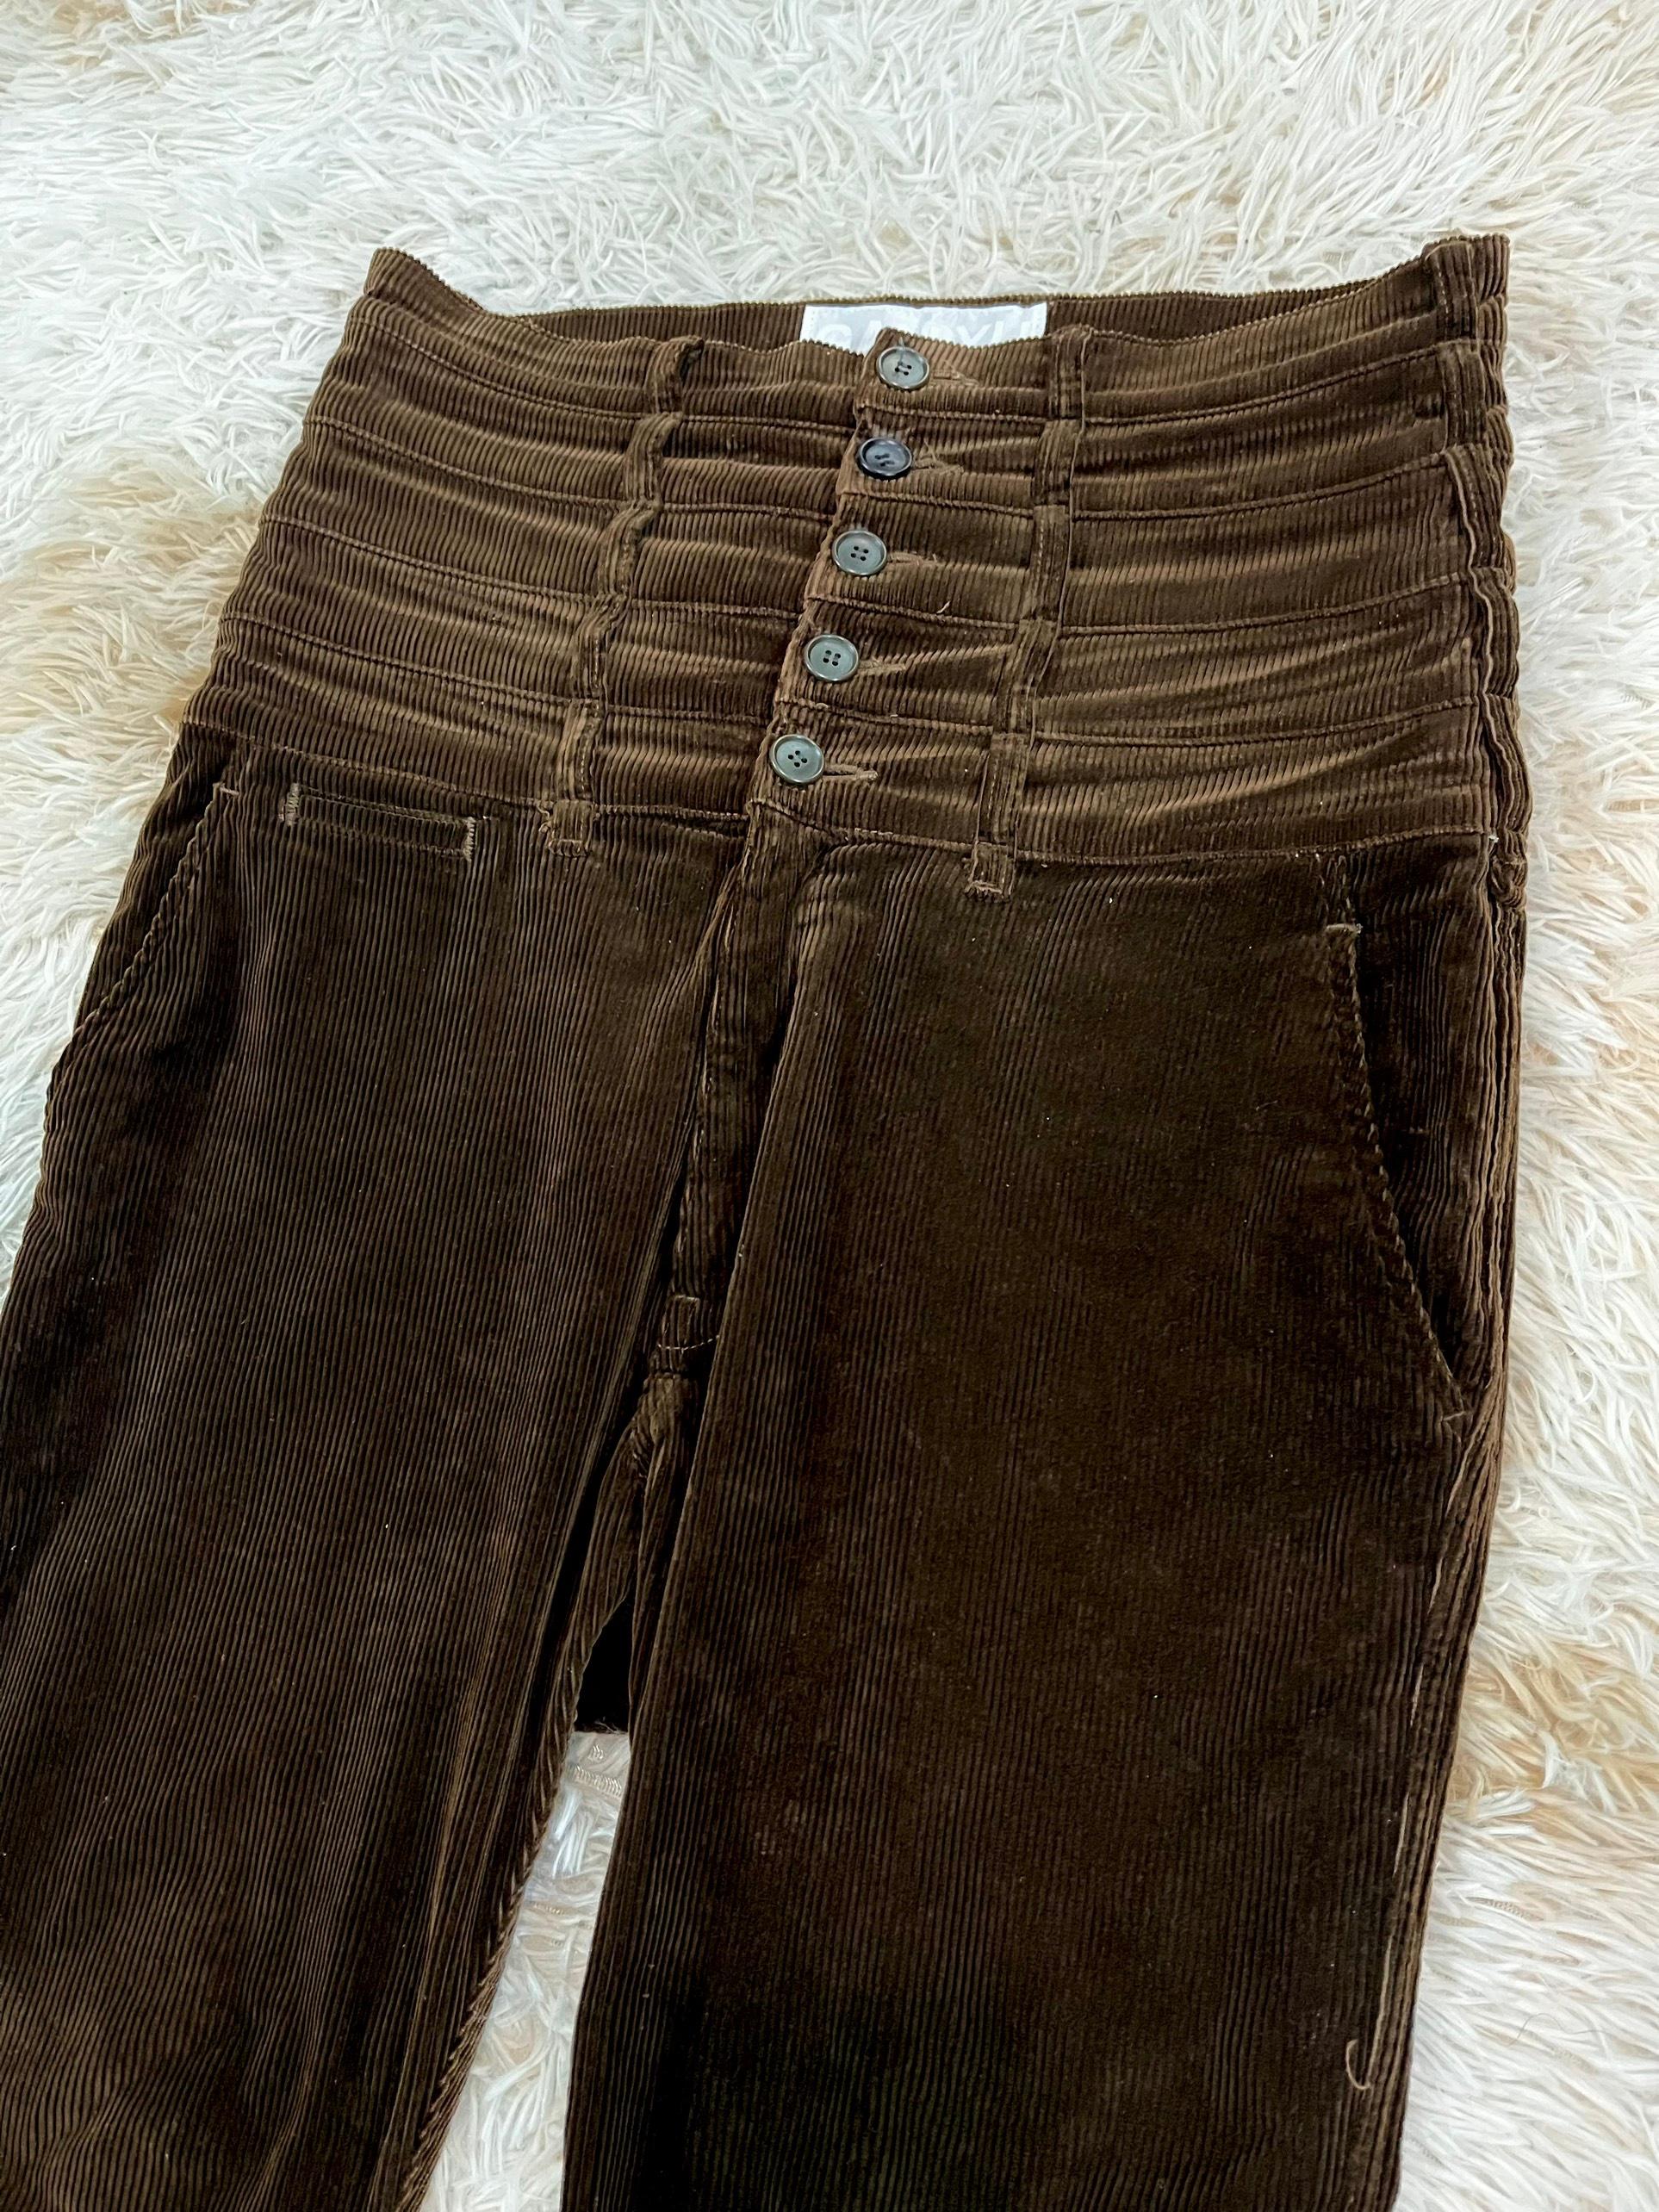 Ganryu Juxtapose Belt Loop Pants In Excellent Condition For Sale In Seattle, WA